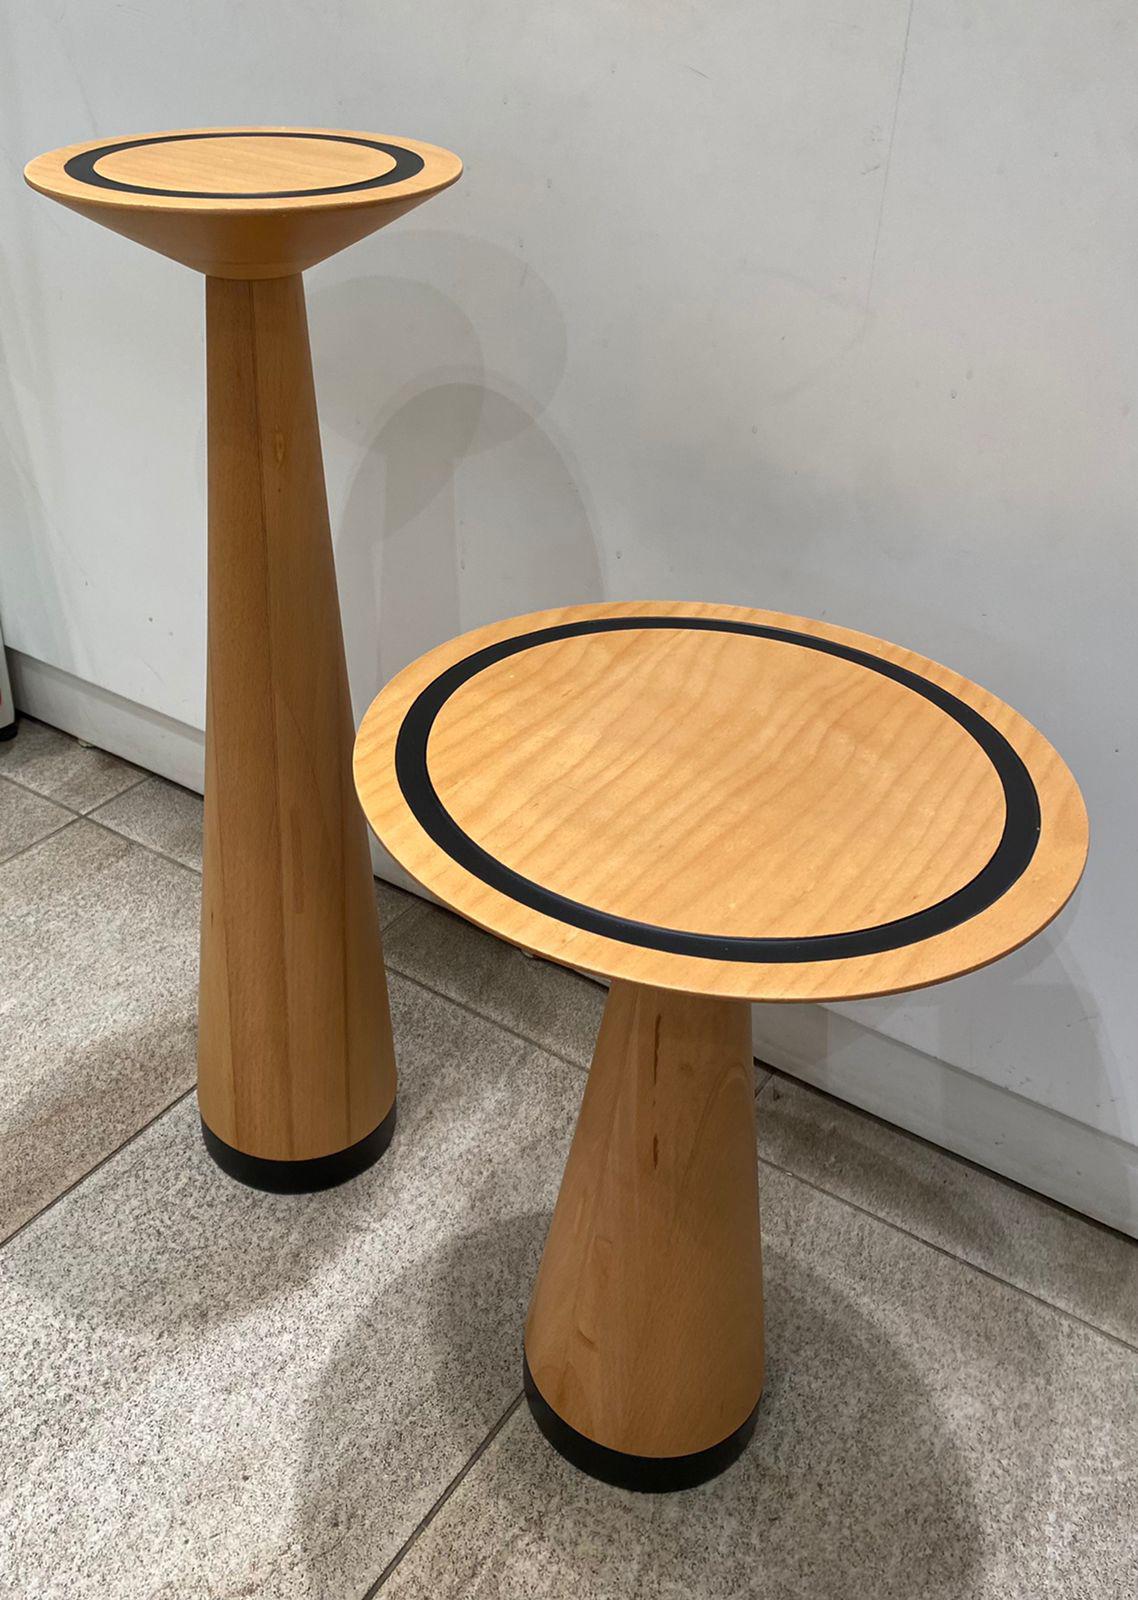 Minimalist Pedestal Side Tables Set in Light Oak Wood and Black Metal Base In New Condition For Sale In Saida, LB